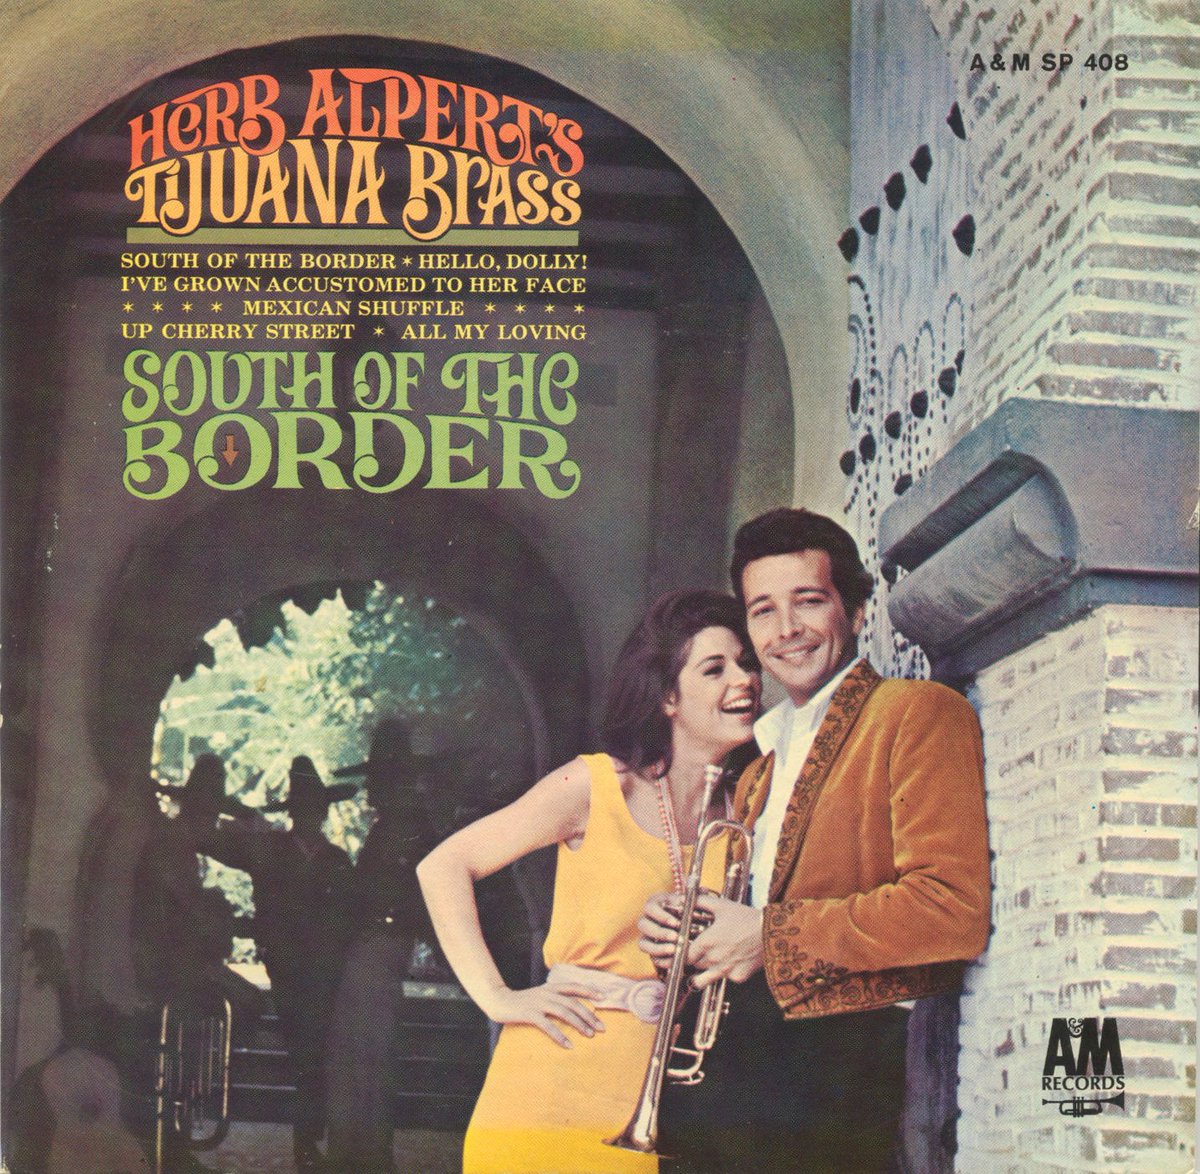 Herb Alpert In May 1966 Four Albums By Herb Alpert The Tijuana Brass Were Certified Gold The Lonely Bull Tijuana Brass Volume 2 South Of The Border What Now